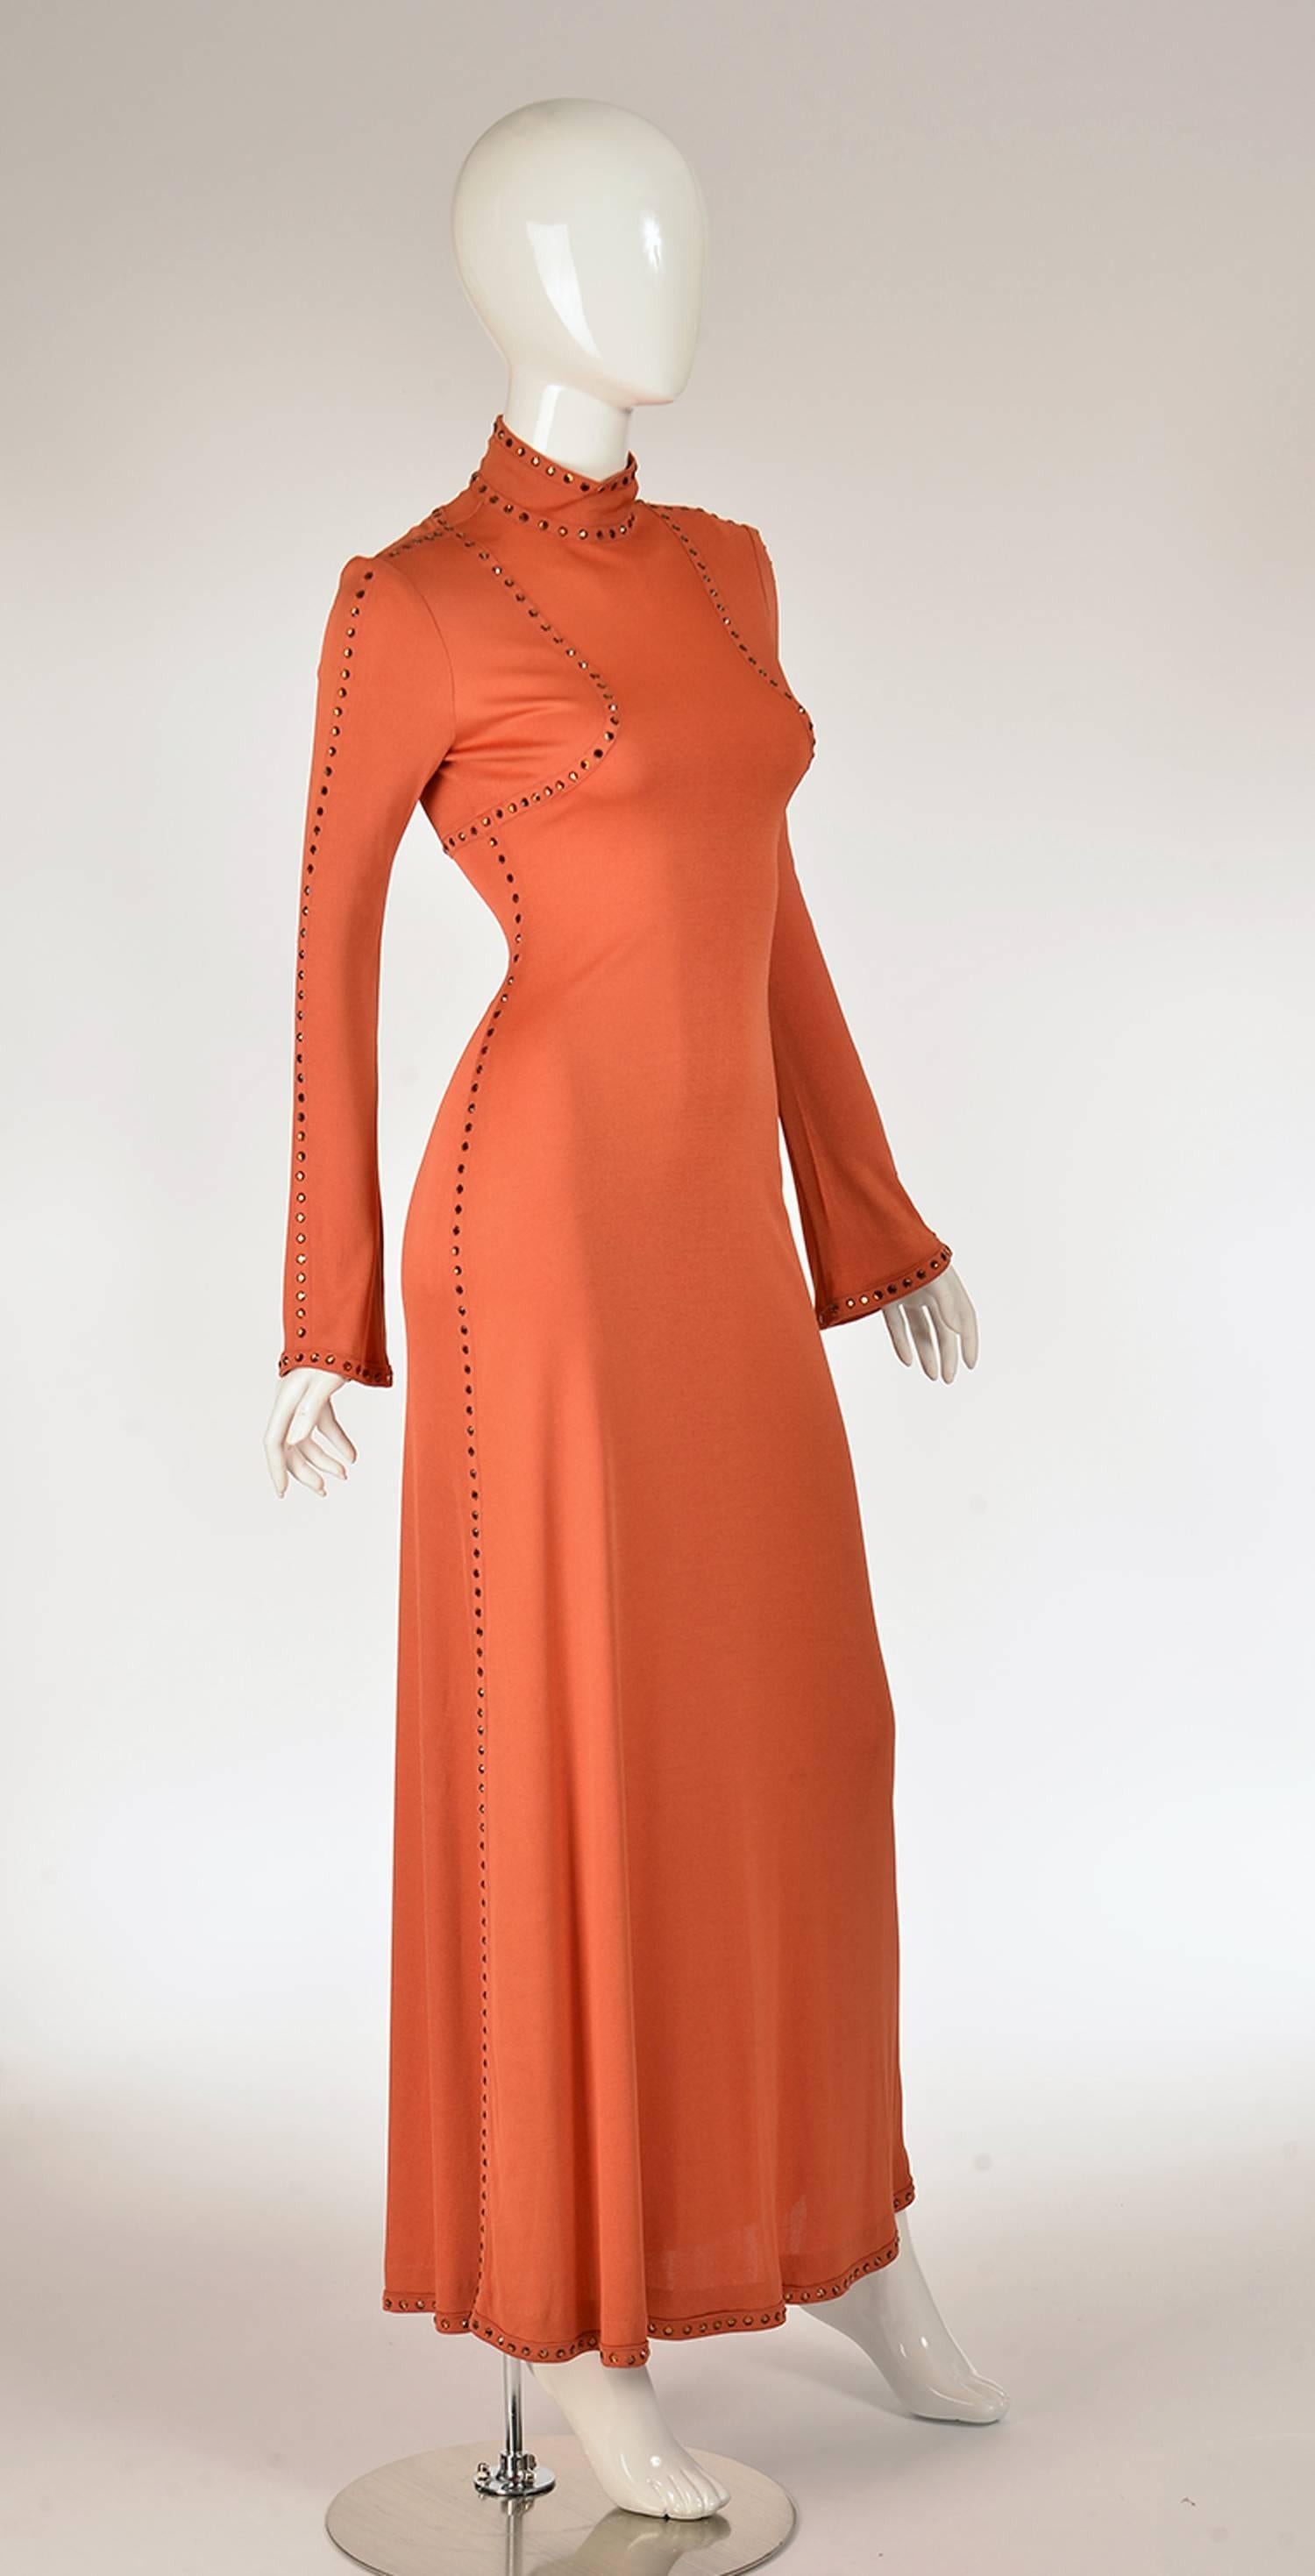 Late 60's striking burnt orange evening dress by Ayako for Imagnin. This high-neck, long sleeve, floor-length evening dress has designer princess seams on the bodice that are covered with Orange rhinestones. The rhinestones continue as design lines